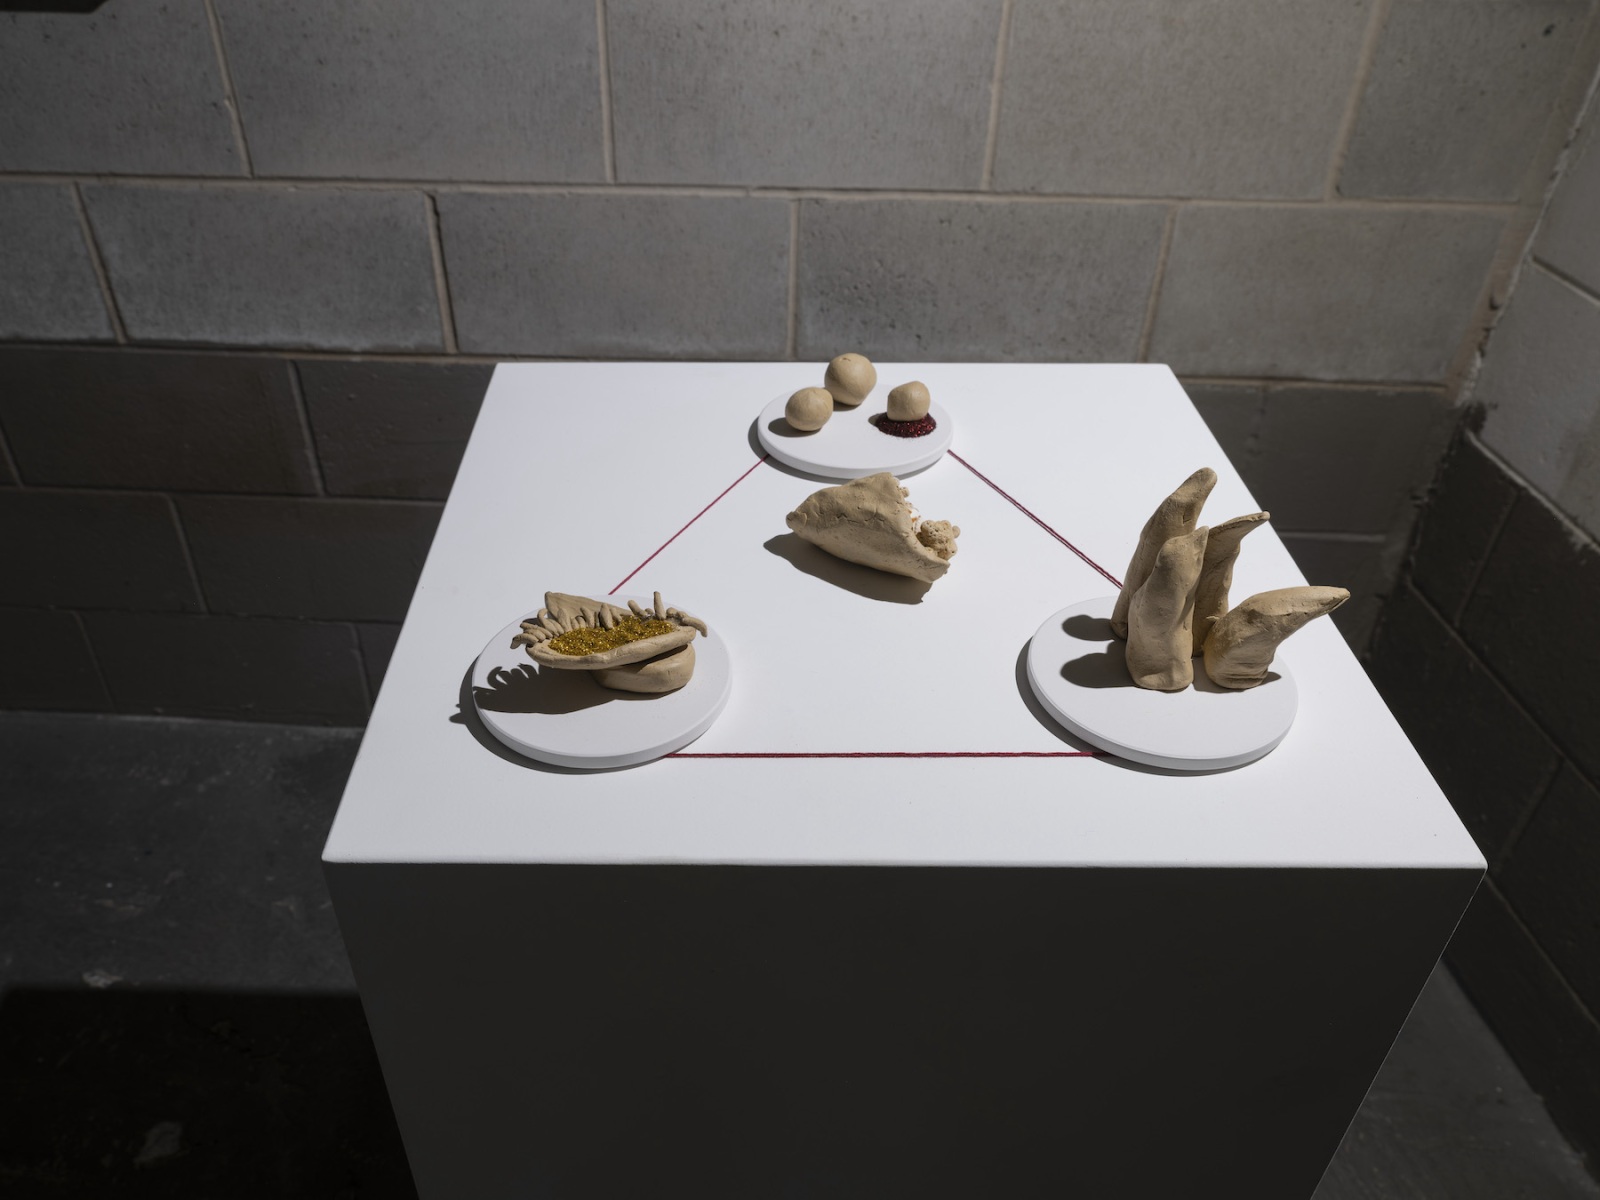 Small clay sculptures sit on top of a white plinth, with red thread connecting them. The plinth sits in the corner of a dimly lit, Besser block room.